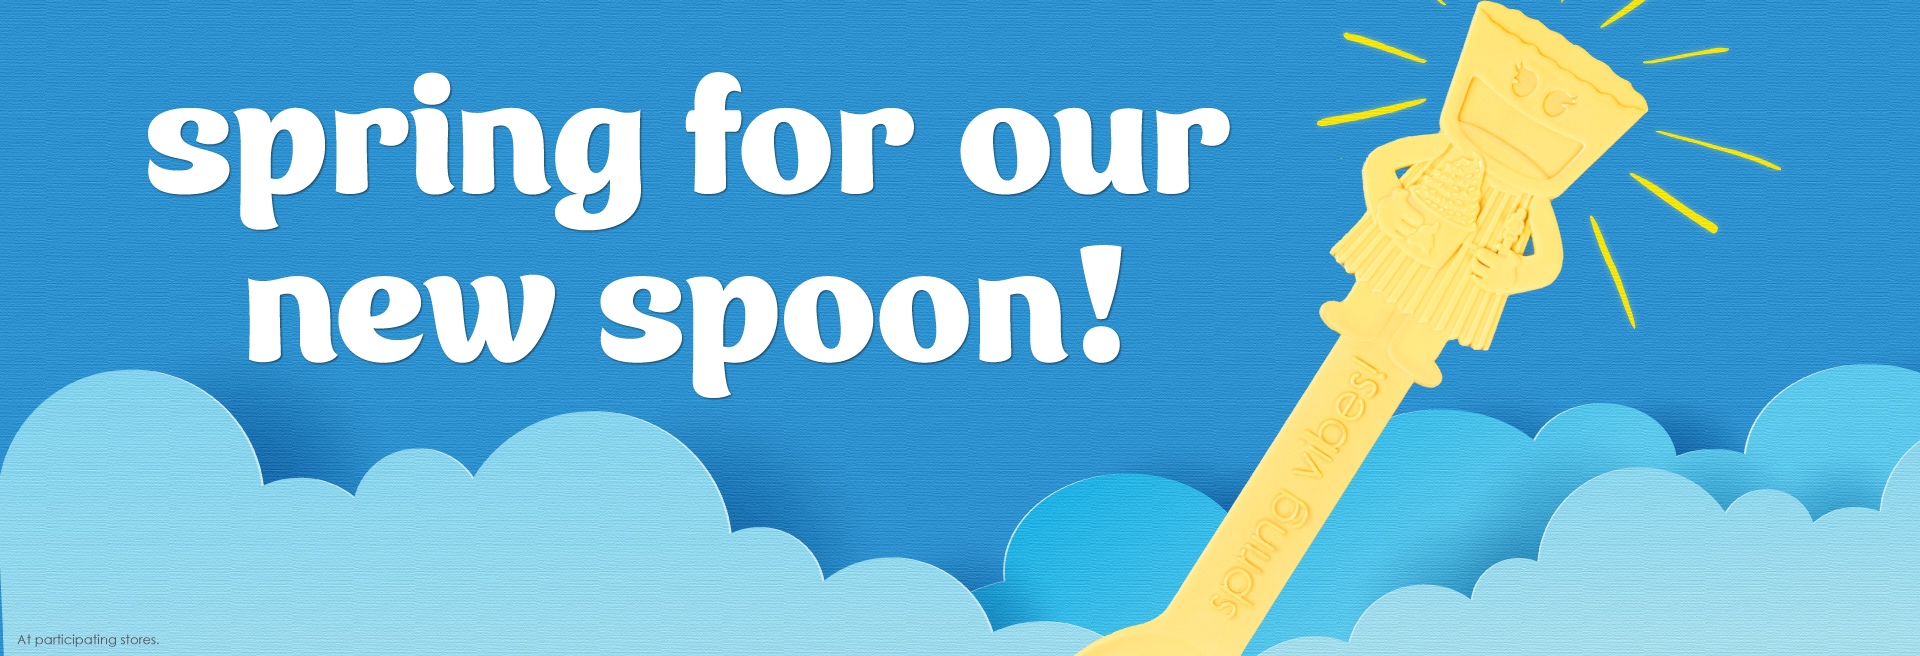 While supplies last, don’t miss your chance to add this spoon to your collection!